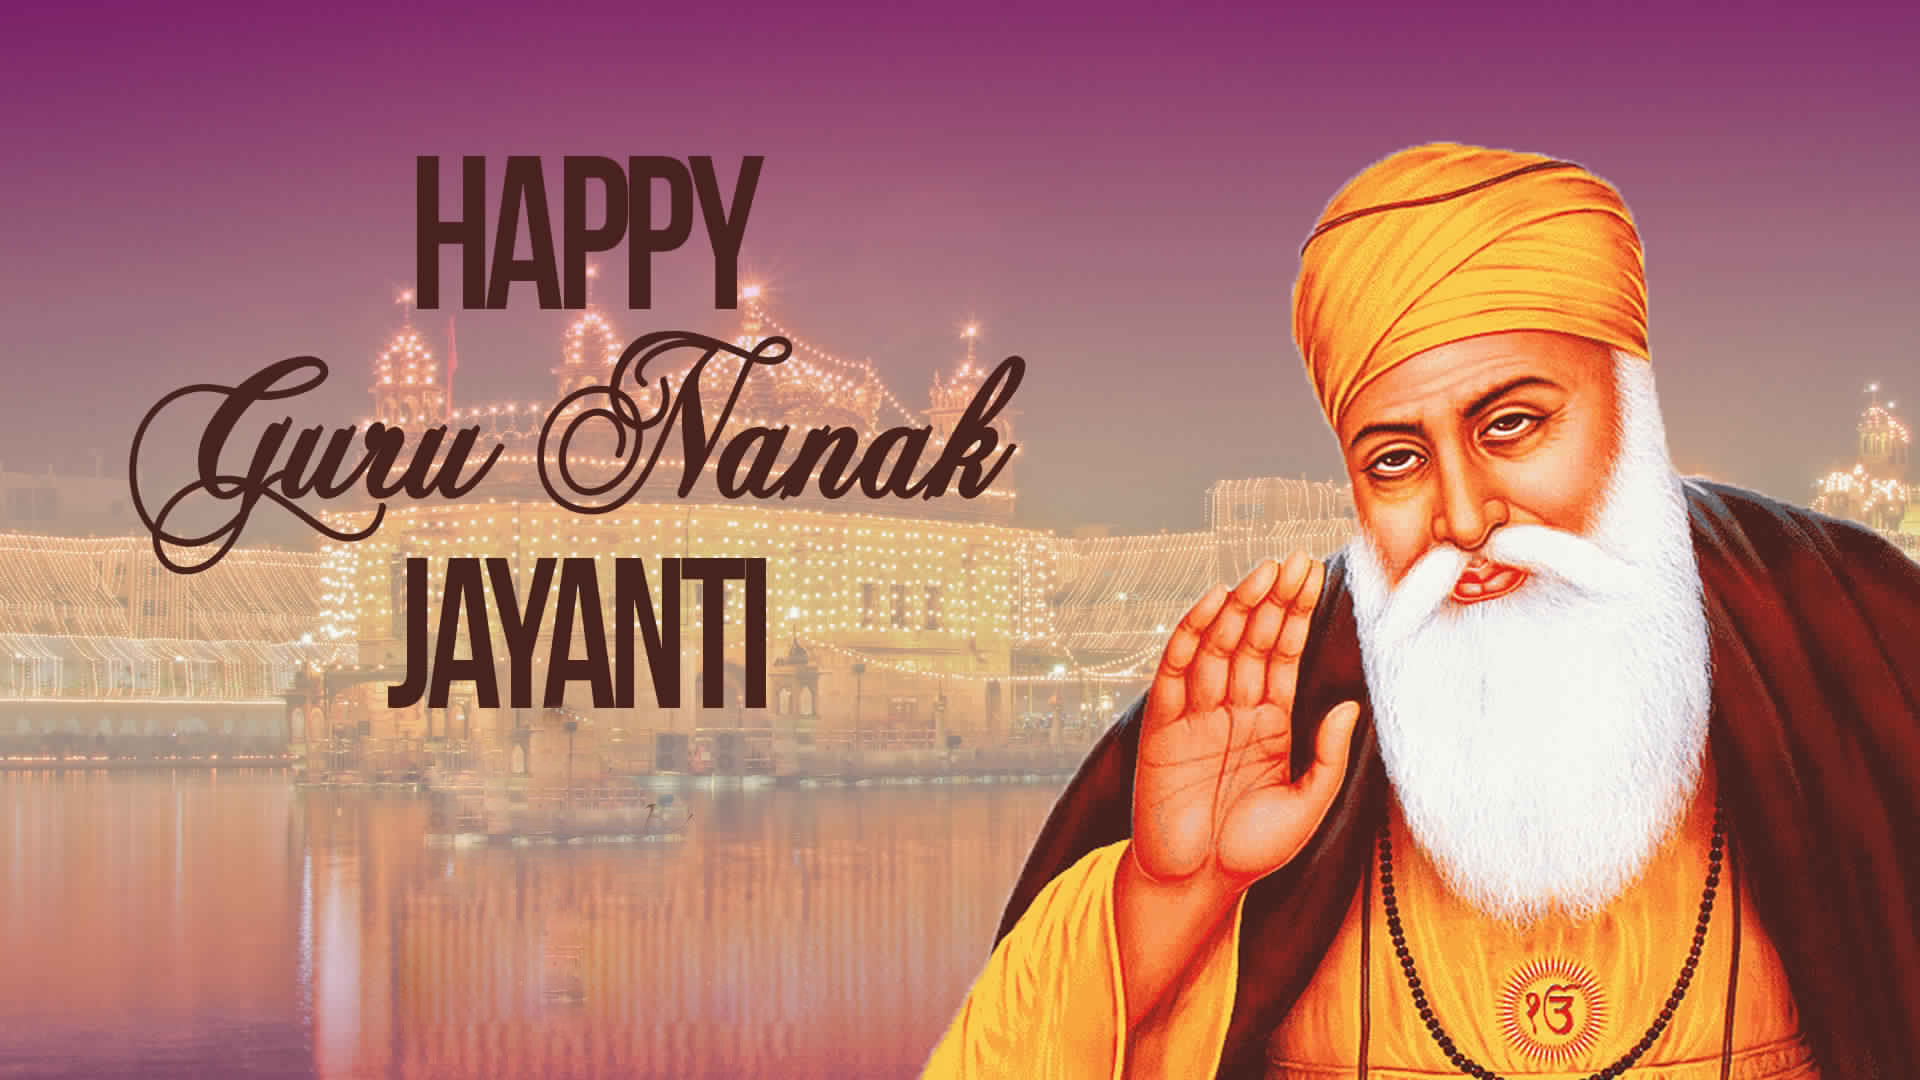 Happy Guru Nanak Gurpurab 2020 Images, HD Photos, GIFs, 4K Wallpapers, And  High-Resolution Pictures For Instagram, WhatsApp Status, And Facebook Story